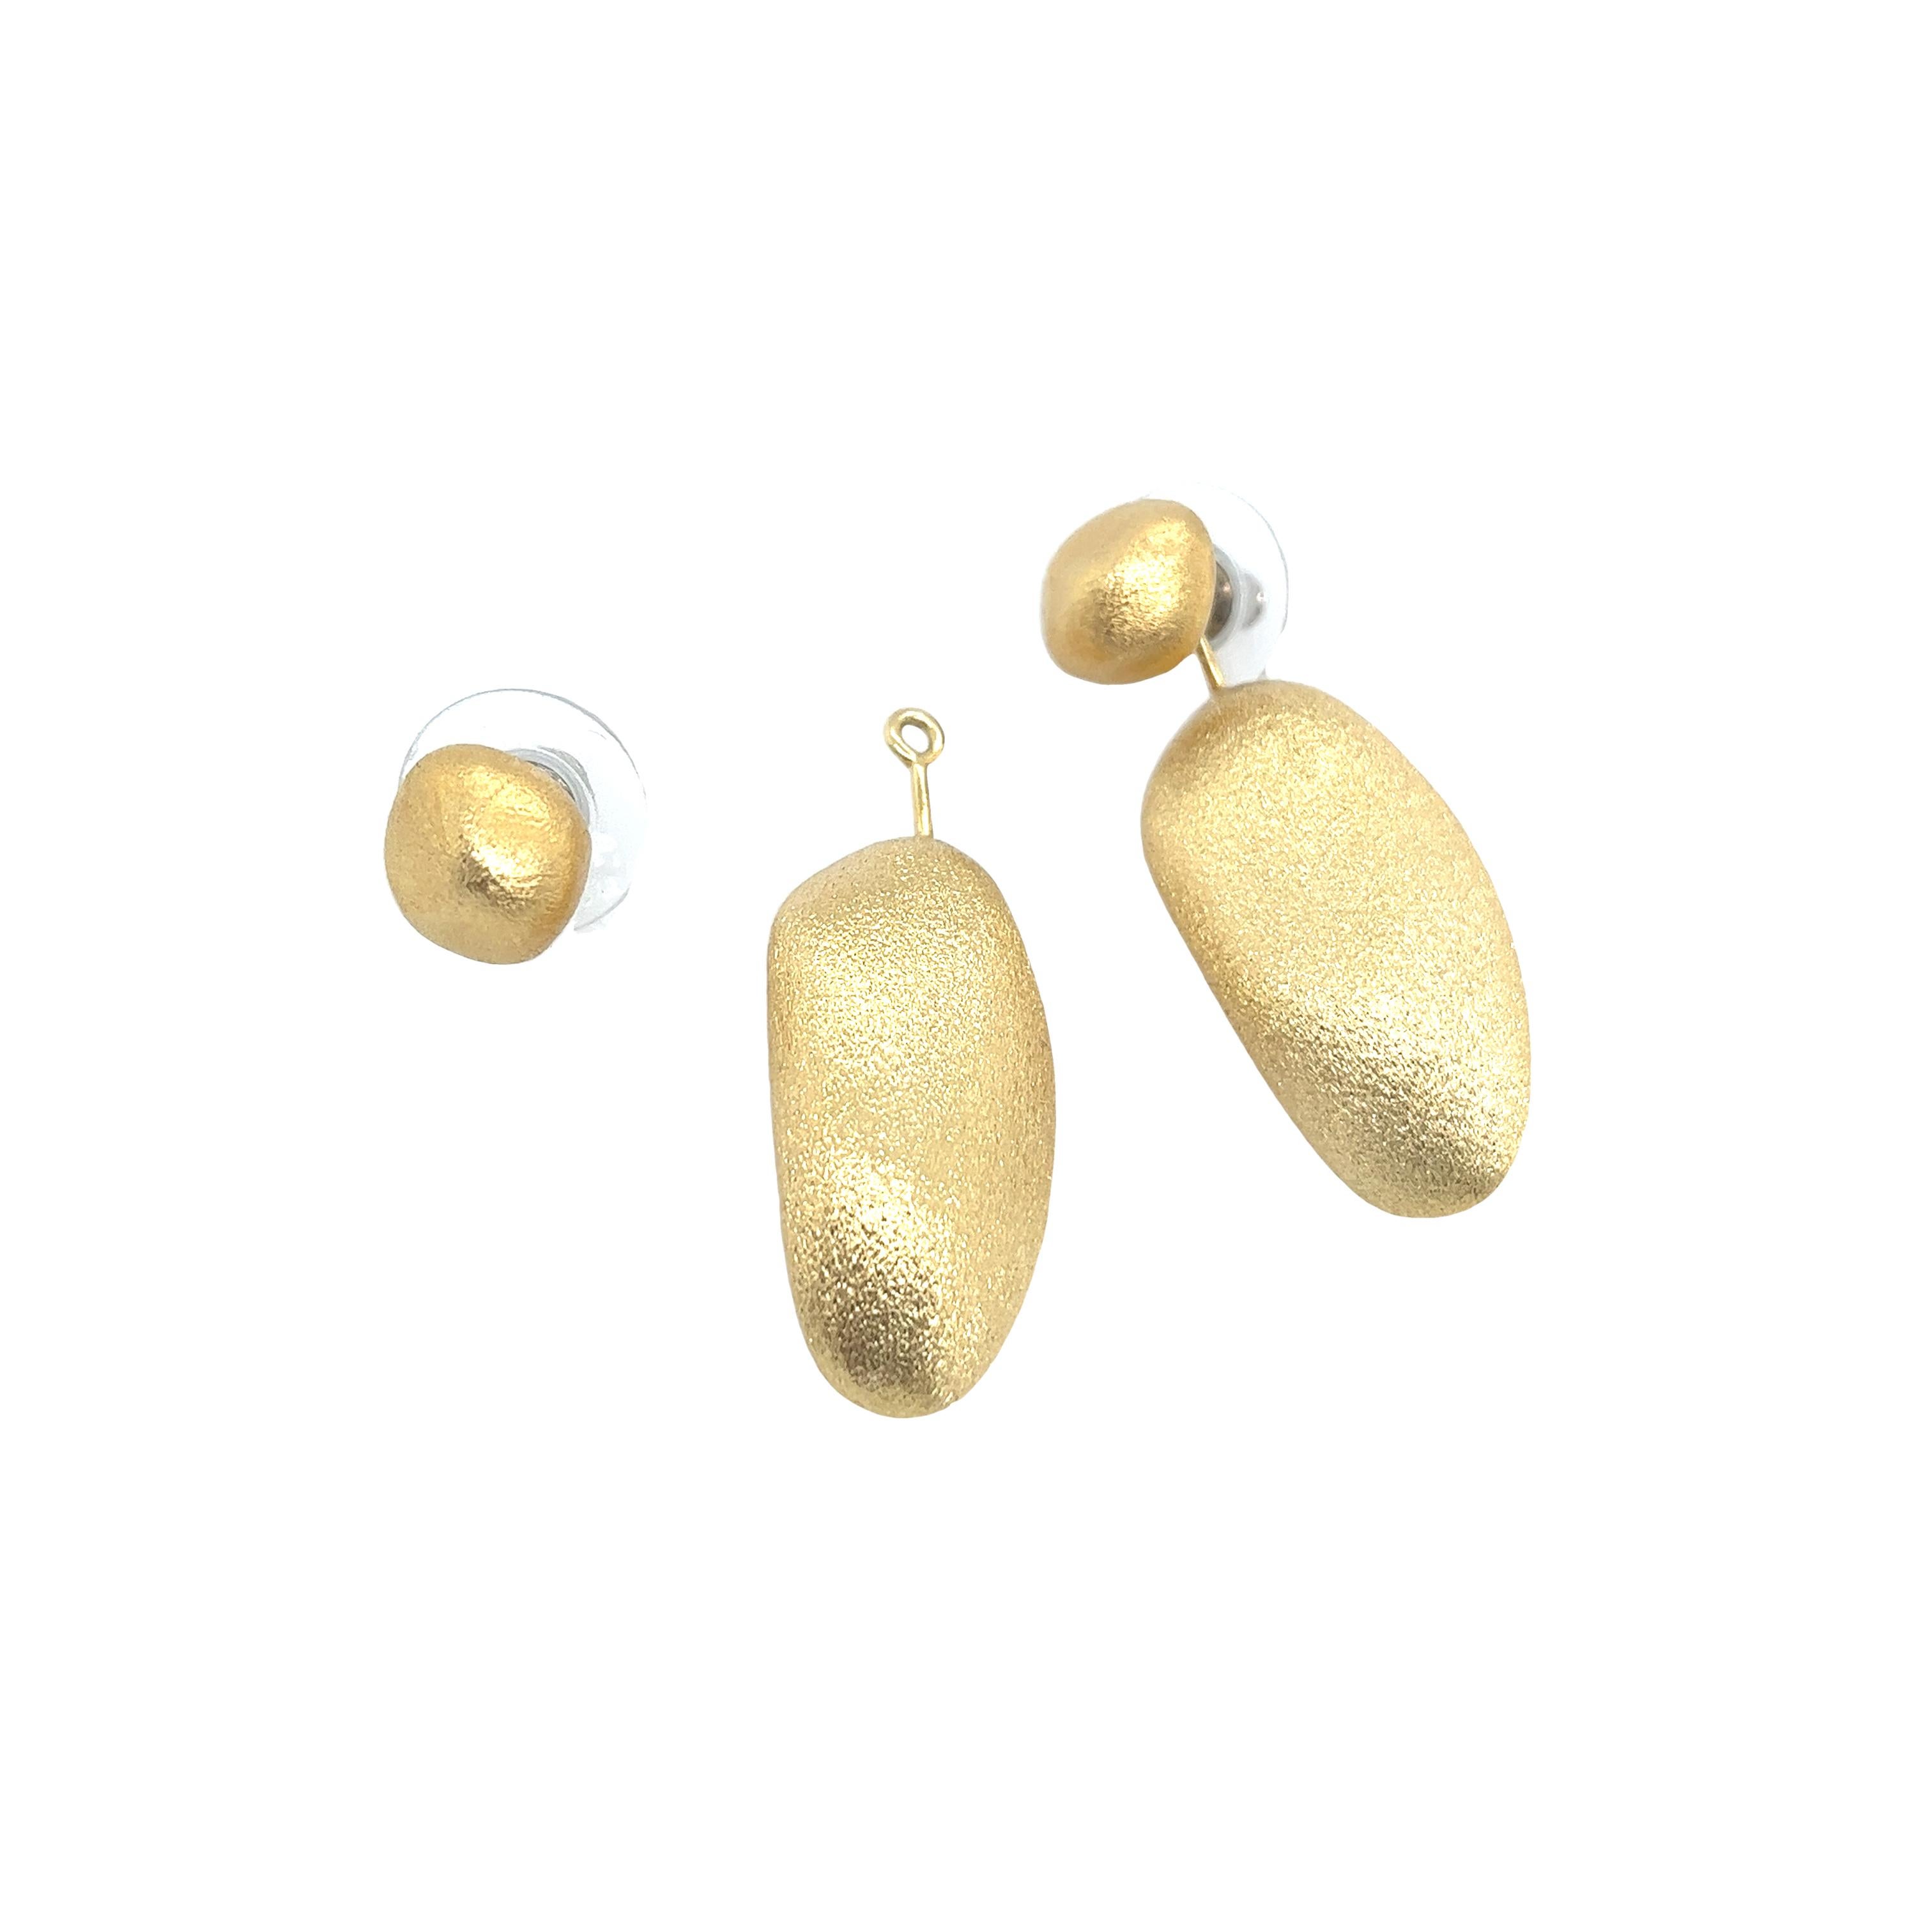 Stunning pair H. Stern Golden Stone Day-and-night 
convertible earrings in 18ct yellow gold, 
each earring features a detachable stone earring 
and can be worn single or with the drop larger stone removable setting.
For pierced ears.
Signature: